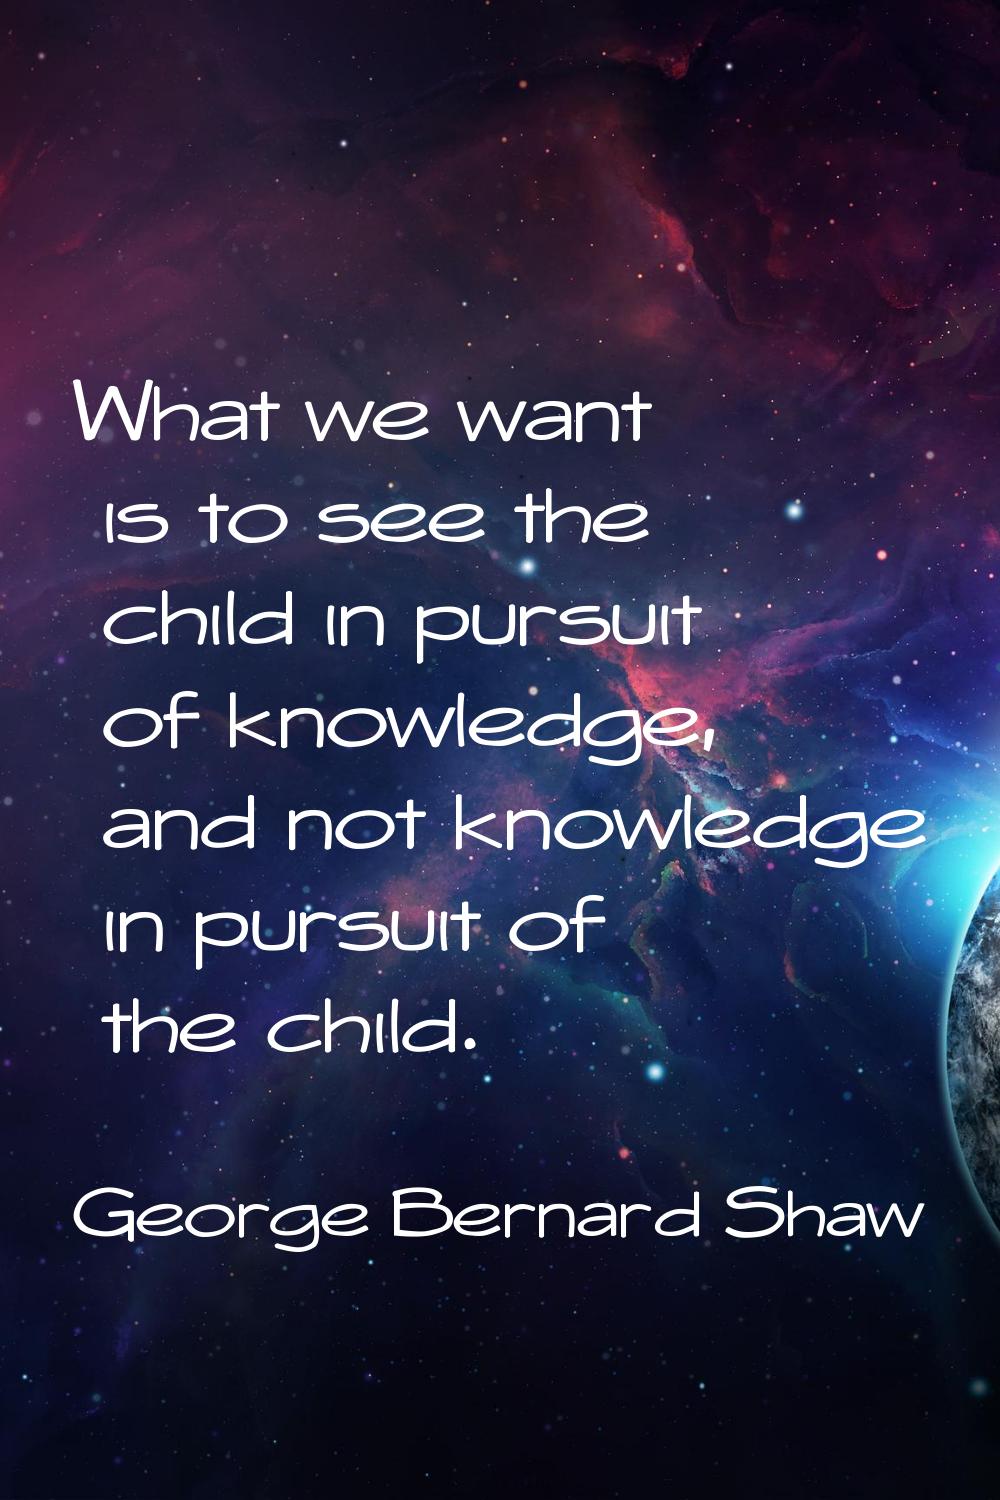 What we want is to see the child in pursuit of knowledge, and not knowledge in pursuit of the child